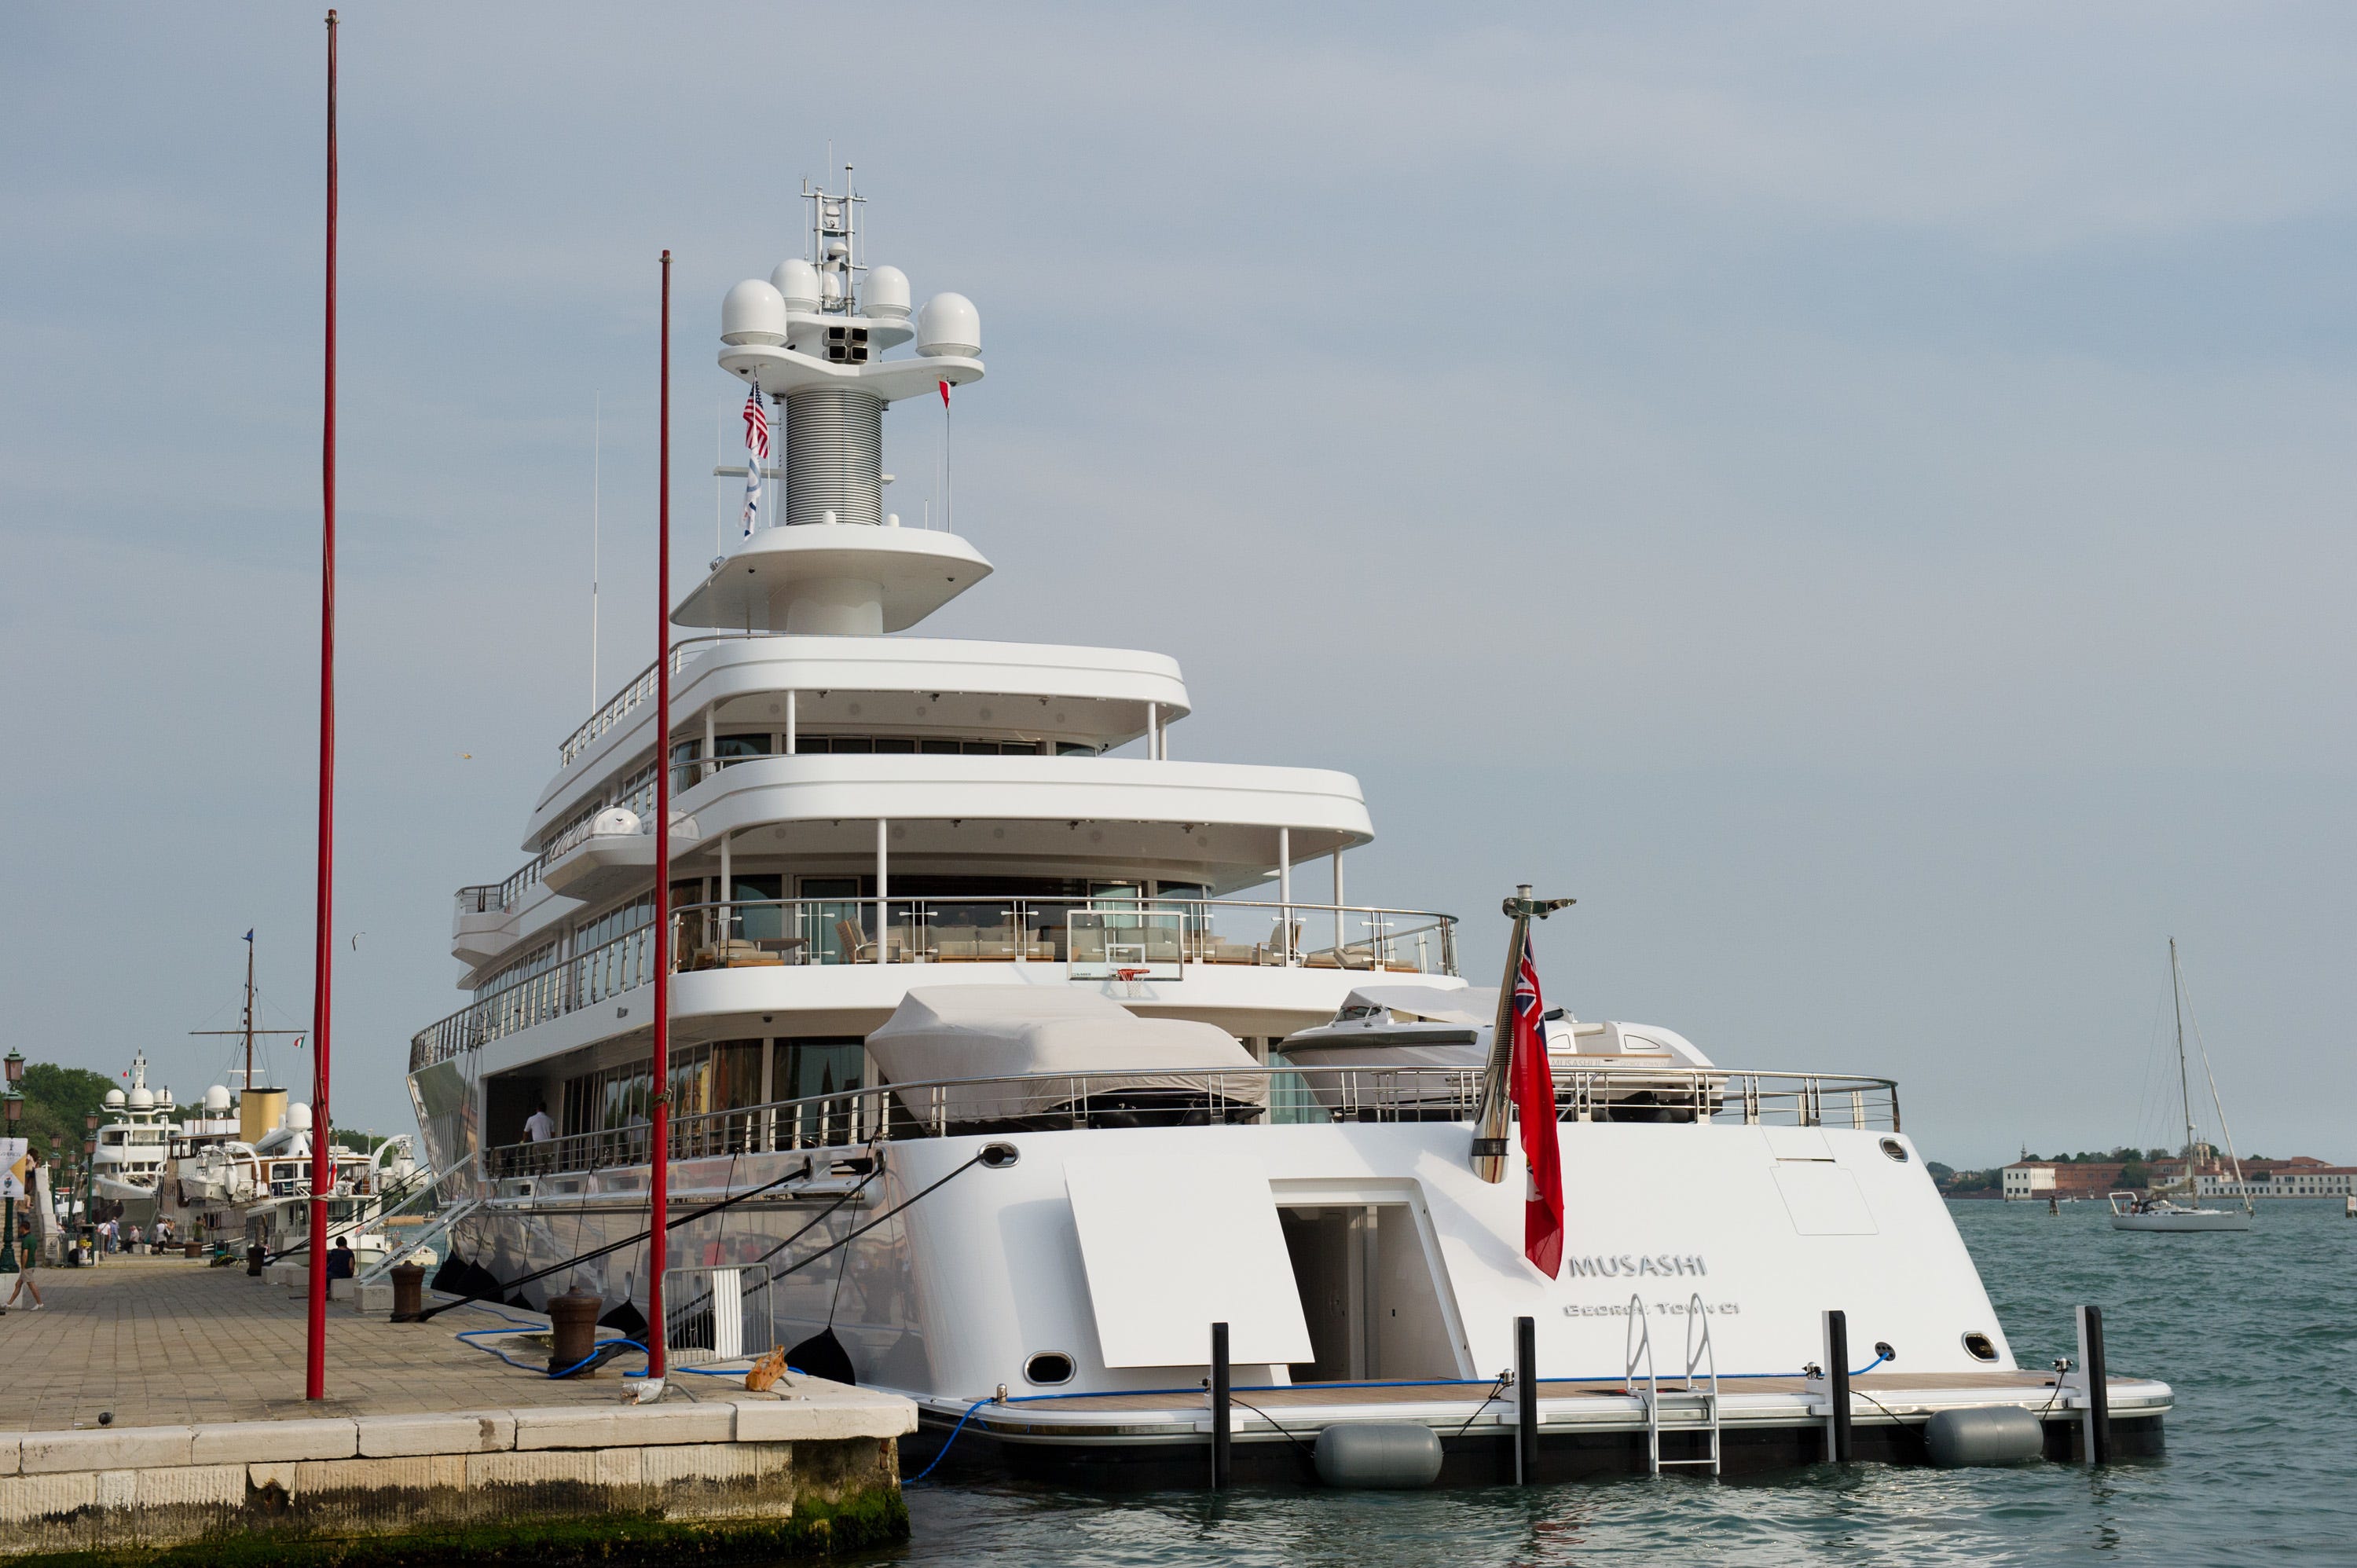 <p><a href="https://www.businessinsider.com/larry-ellison">Oracle founder Larry Ellison</a> has owned several superyachts over the years, including the Katana, the Ronin, and the <a href="https://www.businessinsider.com/rising-sun-yacht-david-geffen-jeff-bezos-barack-obama-2019-8">Rising Sun — which he sold to fellow billionaire David Geffen</a>.</p><p>He purchased his current boat, Musashi, in 2011 for a reported $160 million from custom-yacht giant Feadship.</p><p>Named after a famous samurai warrior, the 88-meter-long yacht has both Japanese and Art Deco-inspired design elements. She also boasts amenities including an elevator, swimming pool, beauty salon, gym, and basketball court.</p><p>Ellison is known for his extravagant spending — private islands, jets, a tennis tournament — and yachting is among his favorite and most expensive hobbies. He took up racing them in the 1990s and financed the <a href="https://www.businessinsider.com/larry-ellison-yacht-racing-2014-10">America's Cup-winning BMW Oracle Racing team</a>.</p>